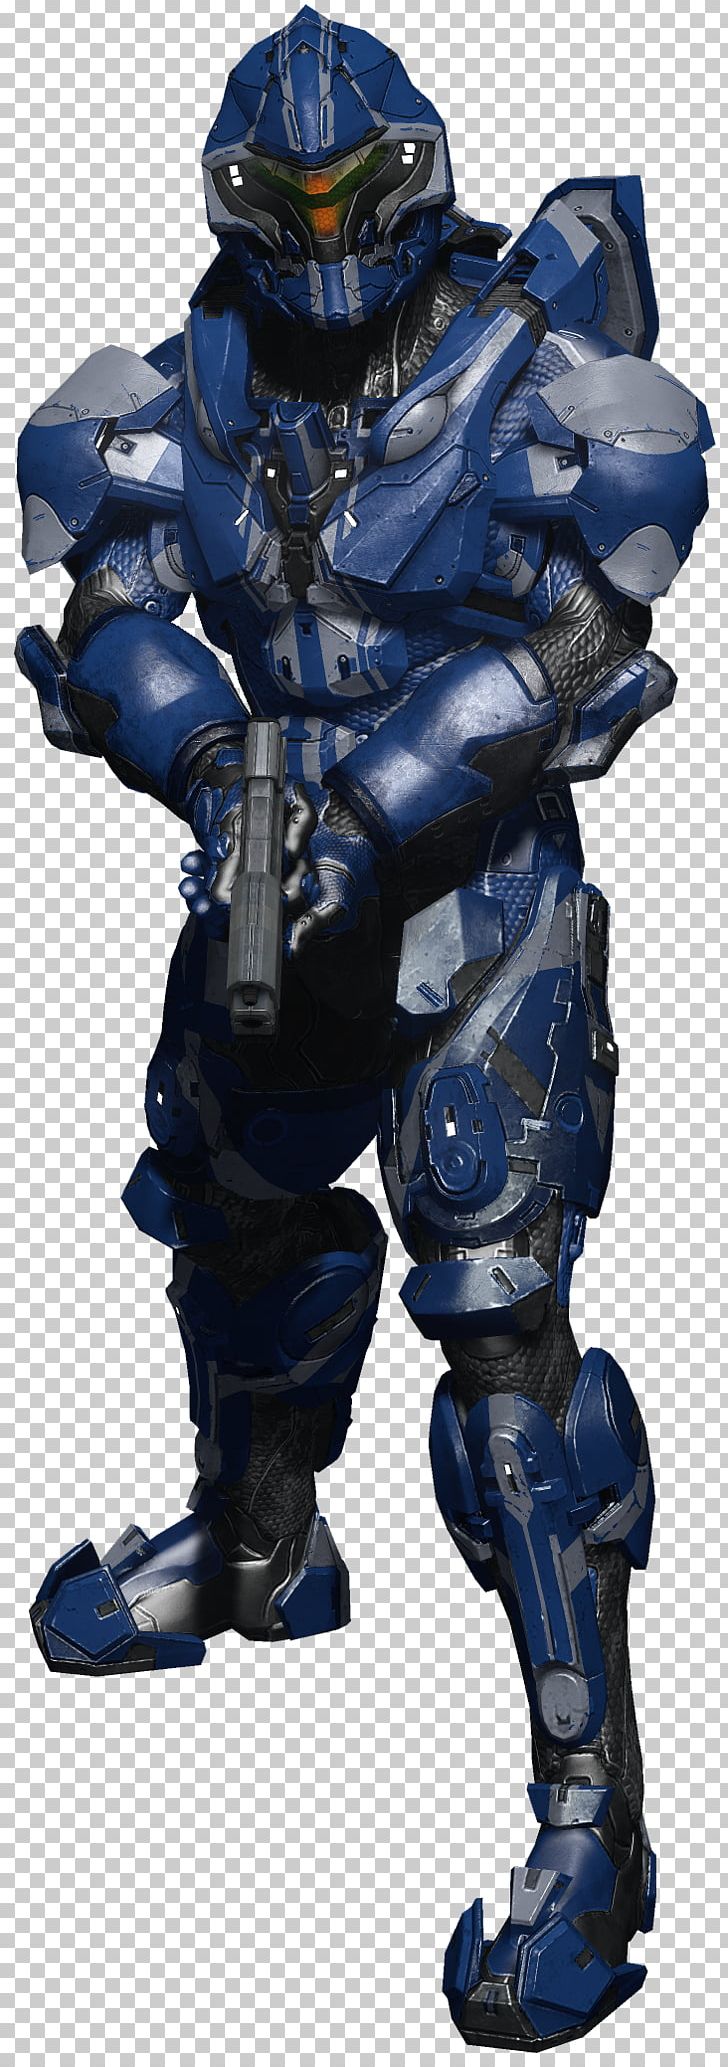 Halo 4 Halo 5: Guardians Pathfinder Roleplaying Game Master Chief Halo Wars 2 PNG, Clipart, 343 Industries, Action Figure, Armour, Dry Suit, Factions Of Halo Free PNG Download